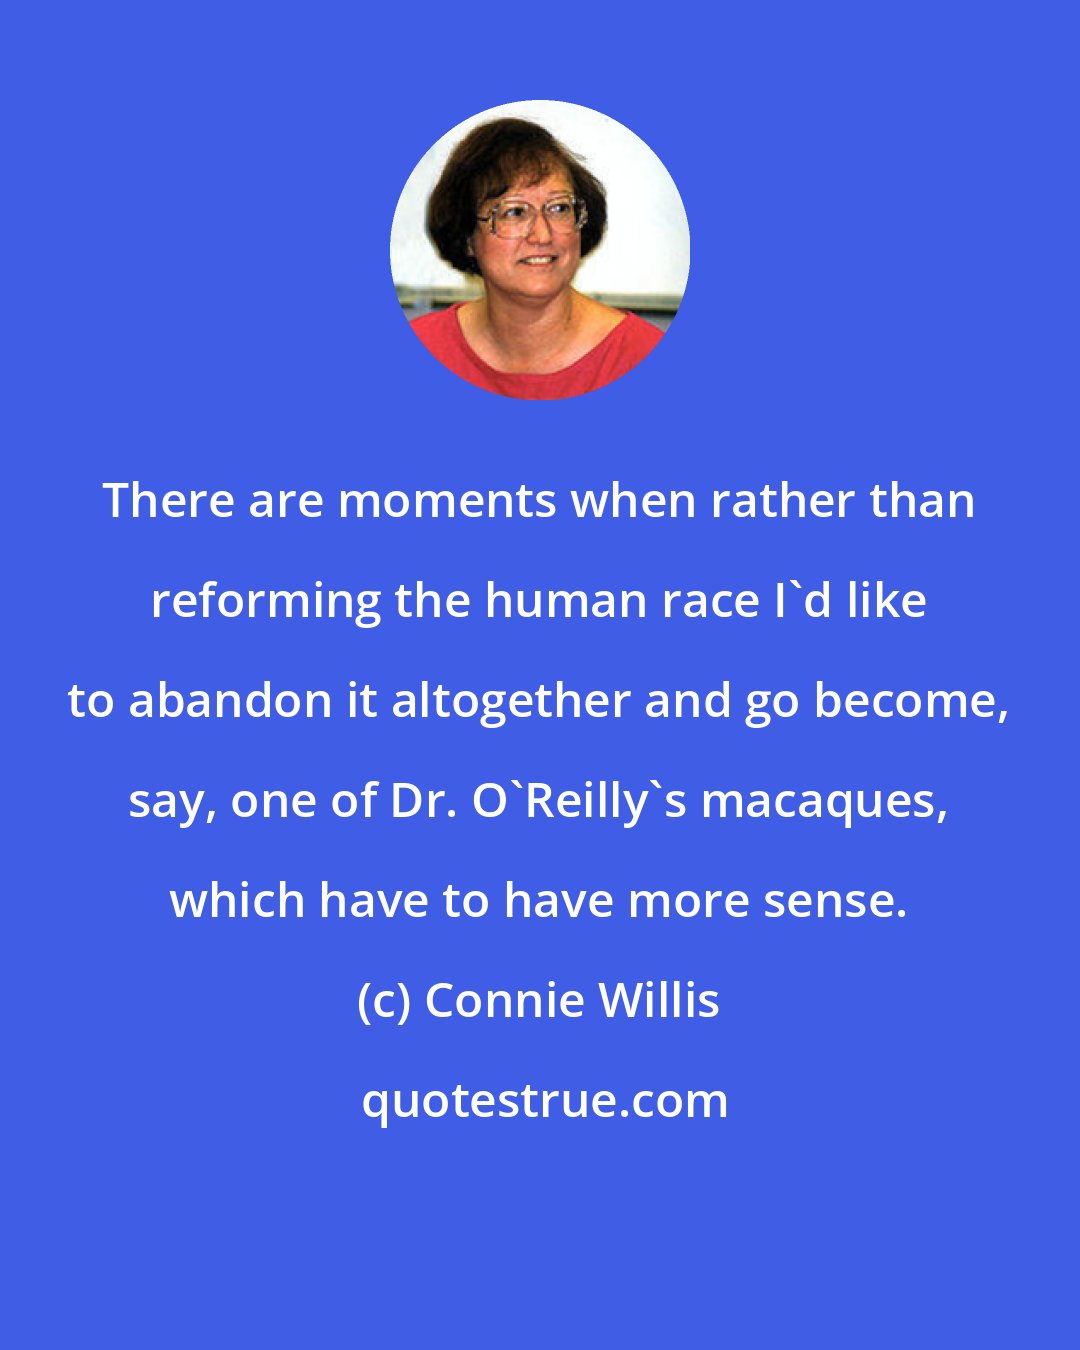 Connie Willis: There are moments when rather than reforming the human race I'd like to abandon it altogether and go become, say, one of Dr. O'Reilly's macaques, which have to have more sense.